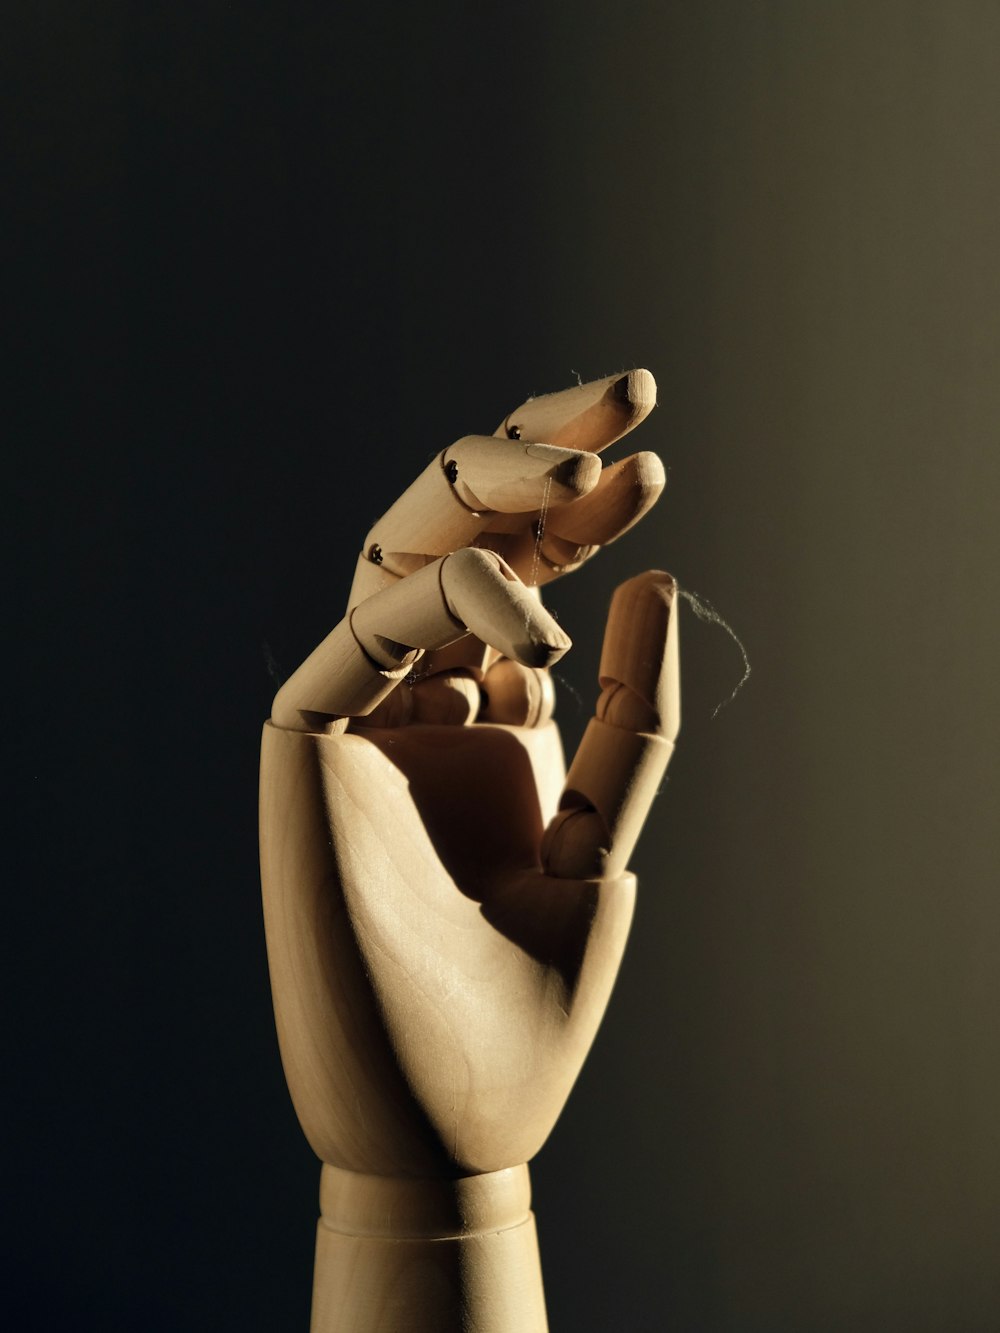 a wooden sculpture of a hand holding a doll